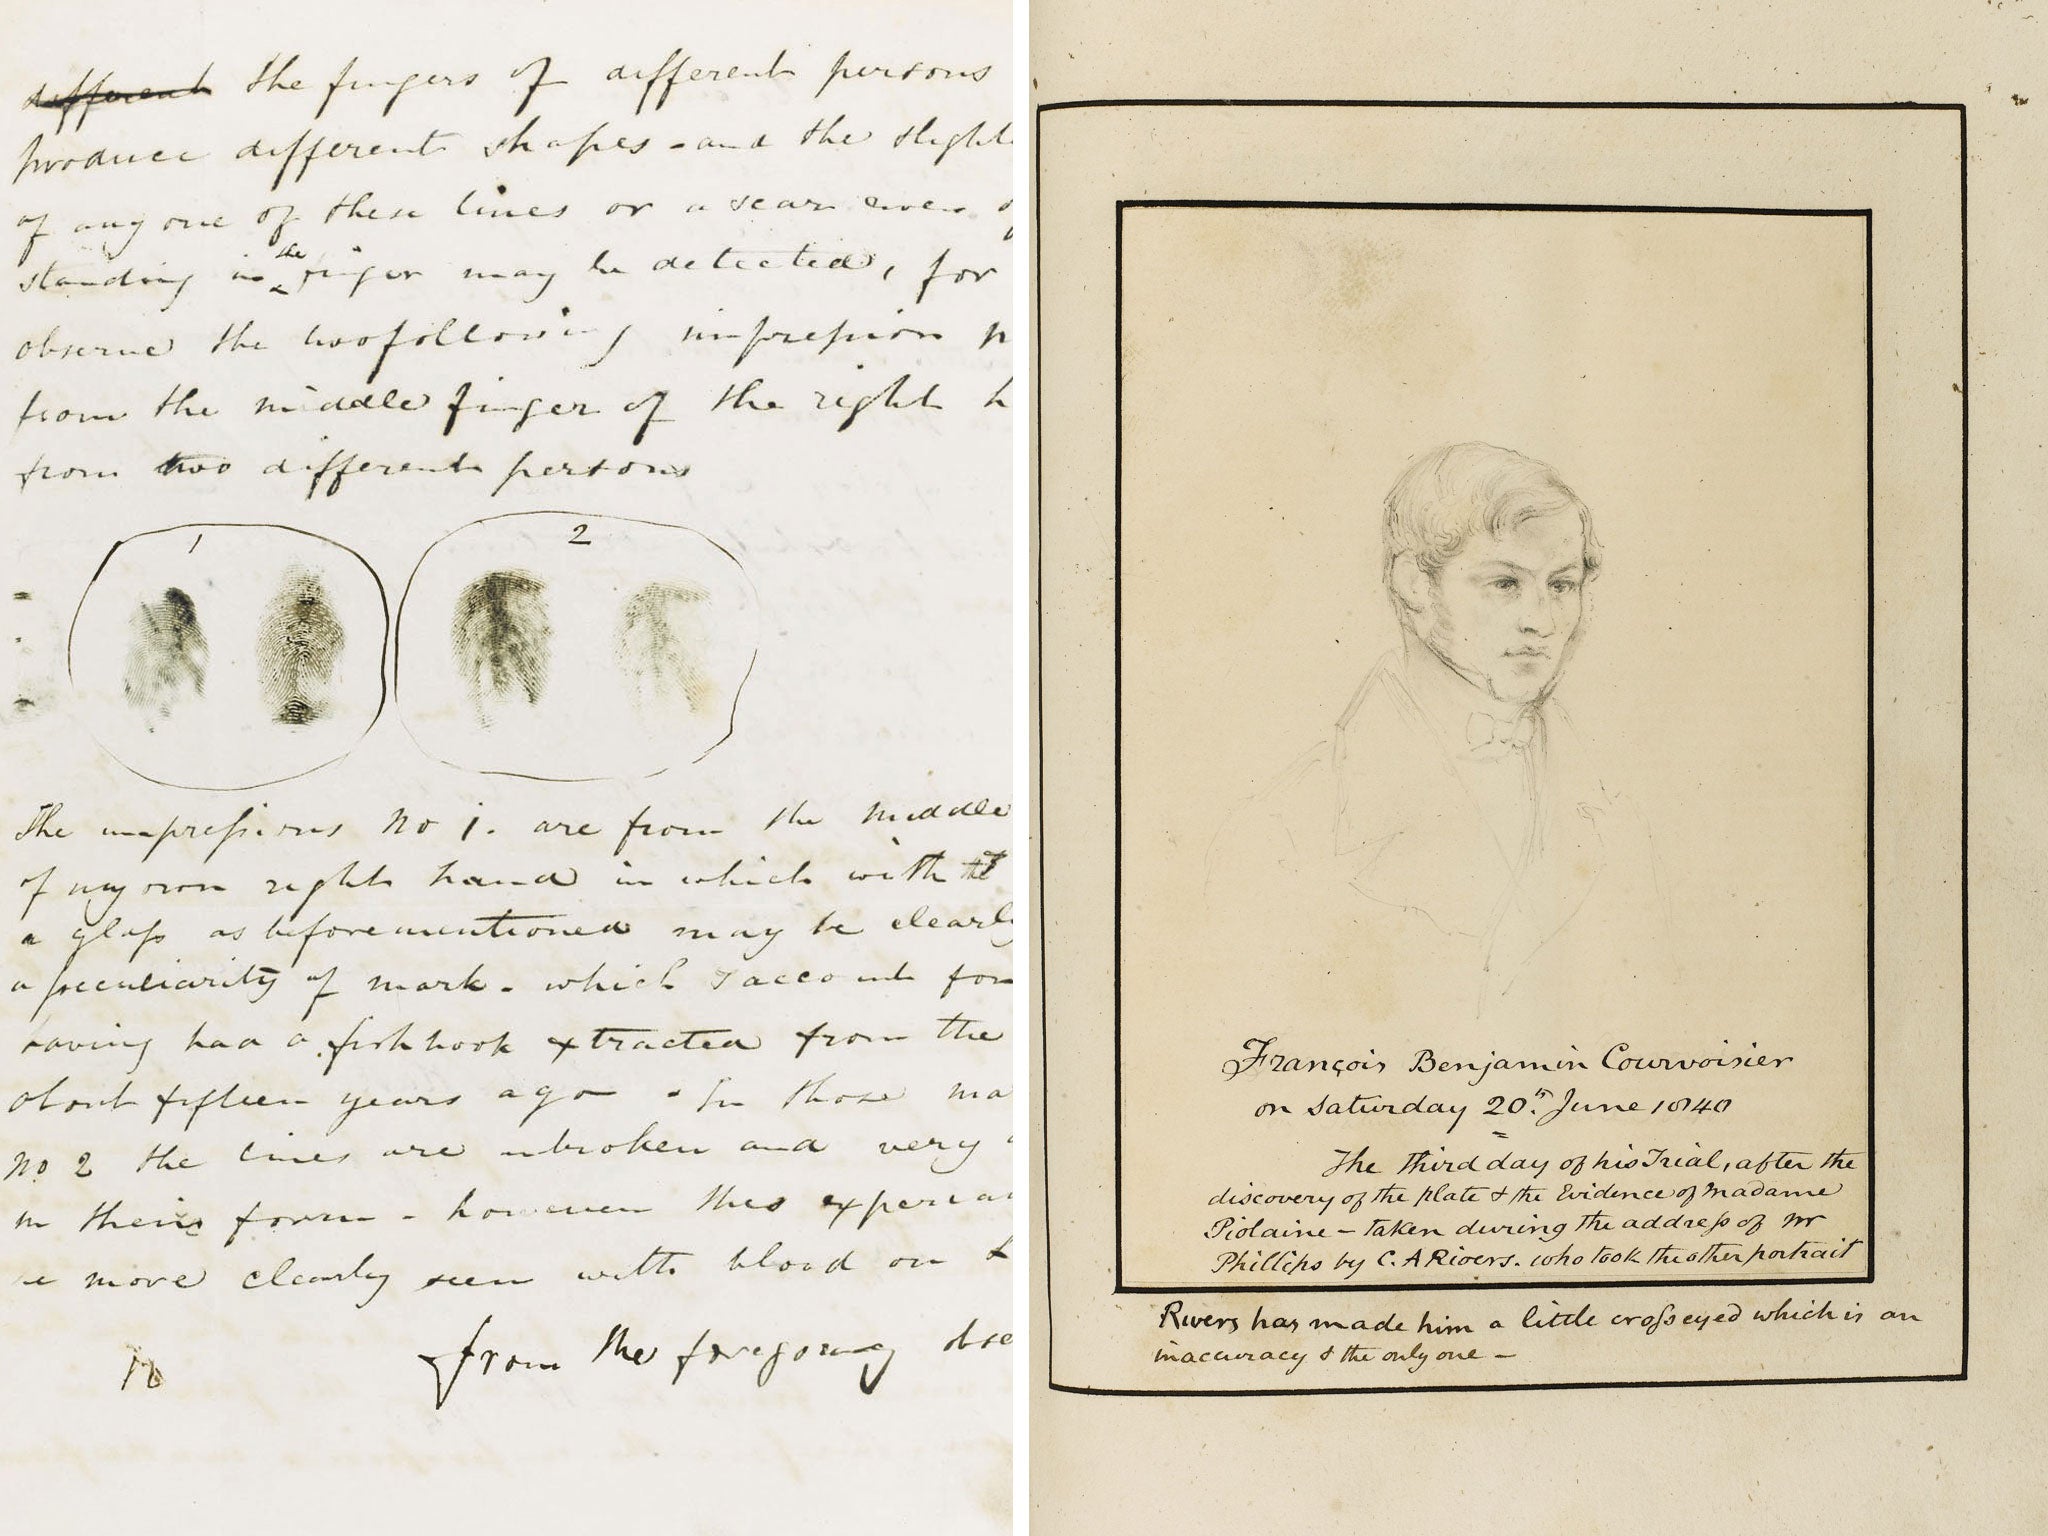 Ahead of his time: The 1840 letter and a sketch of the accused, to be auctioned this week